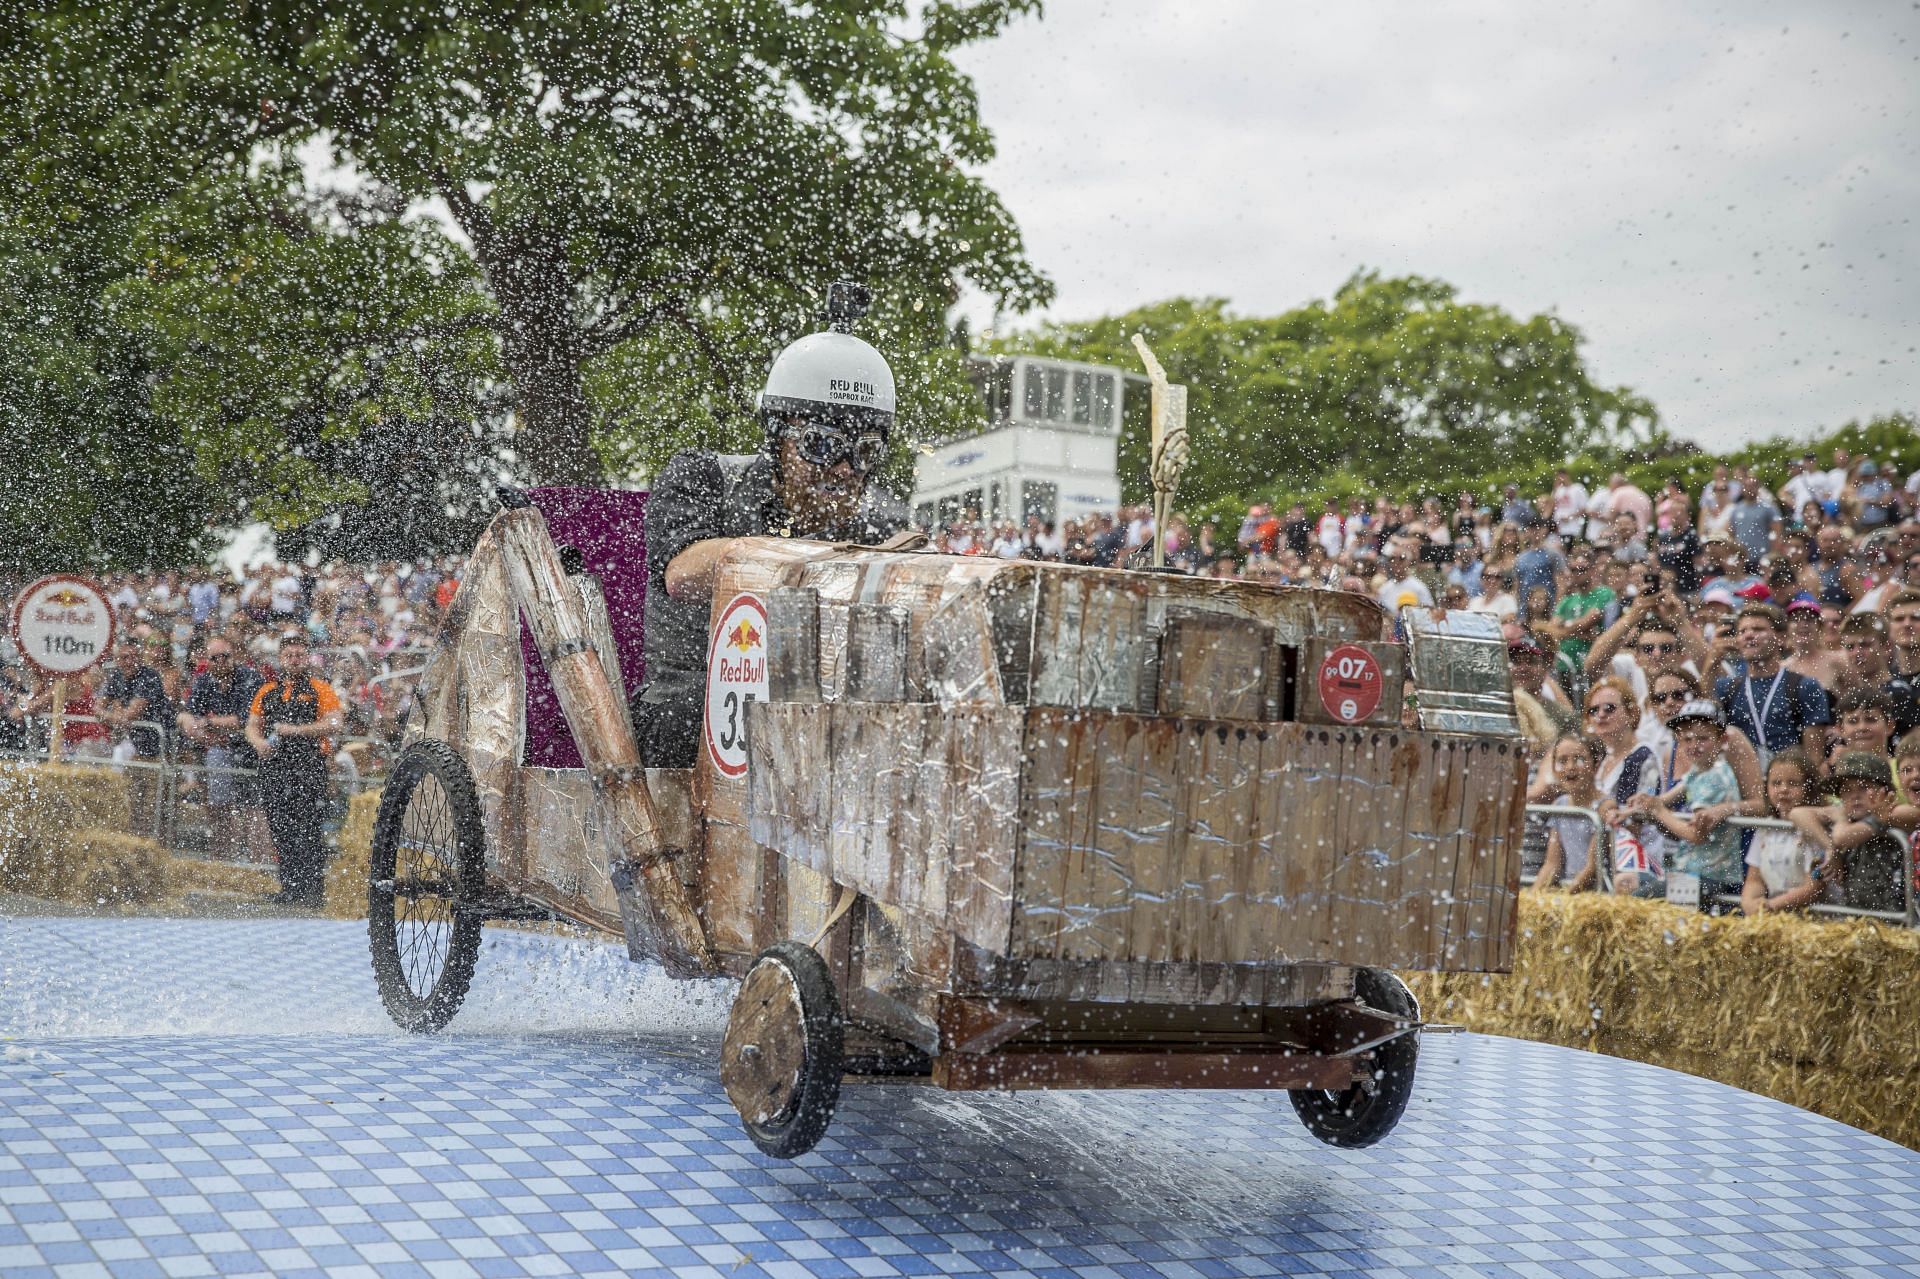 Red Bull Soapbox Race is an example of experiential marketing